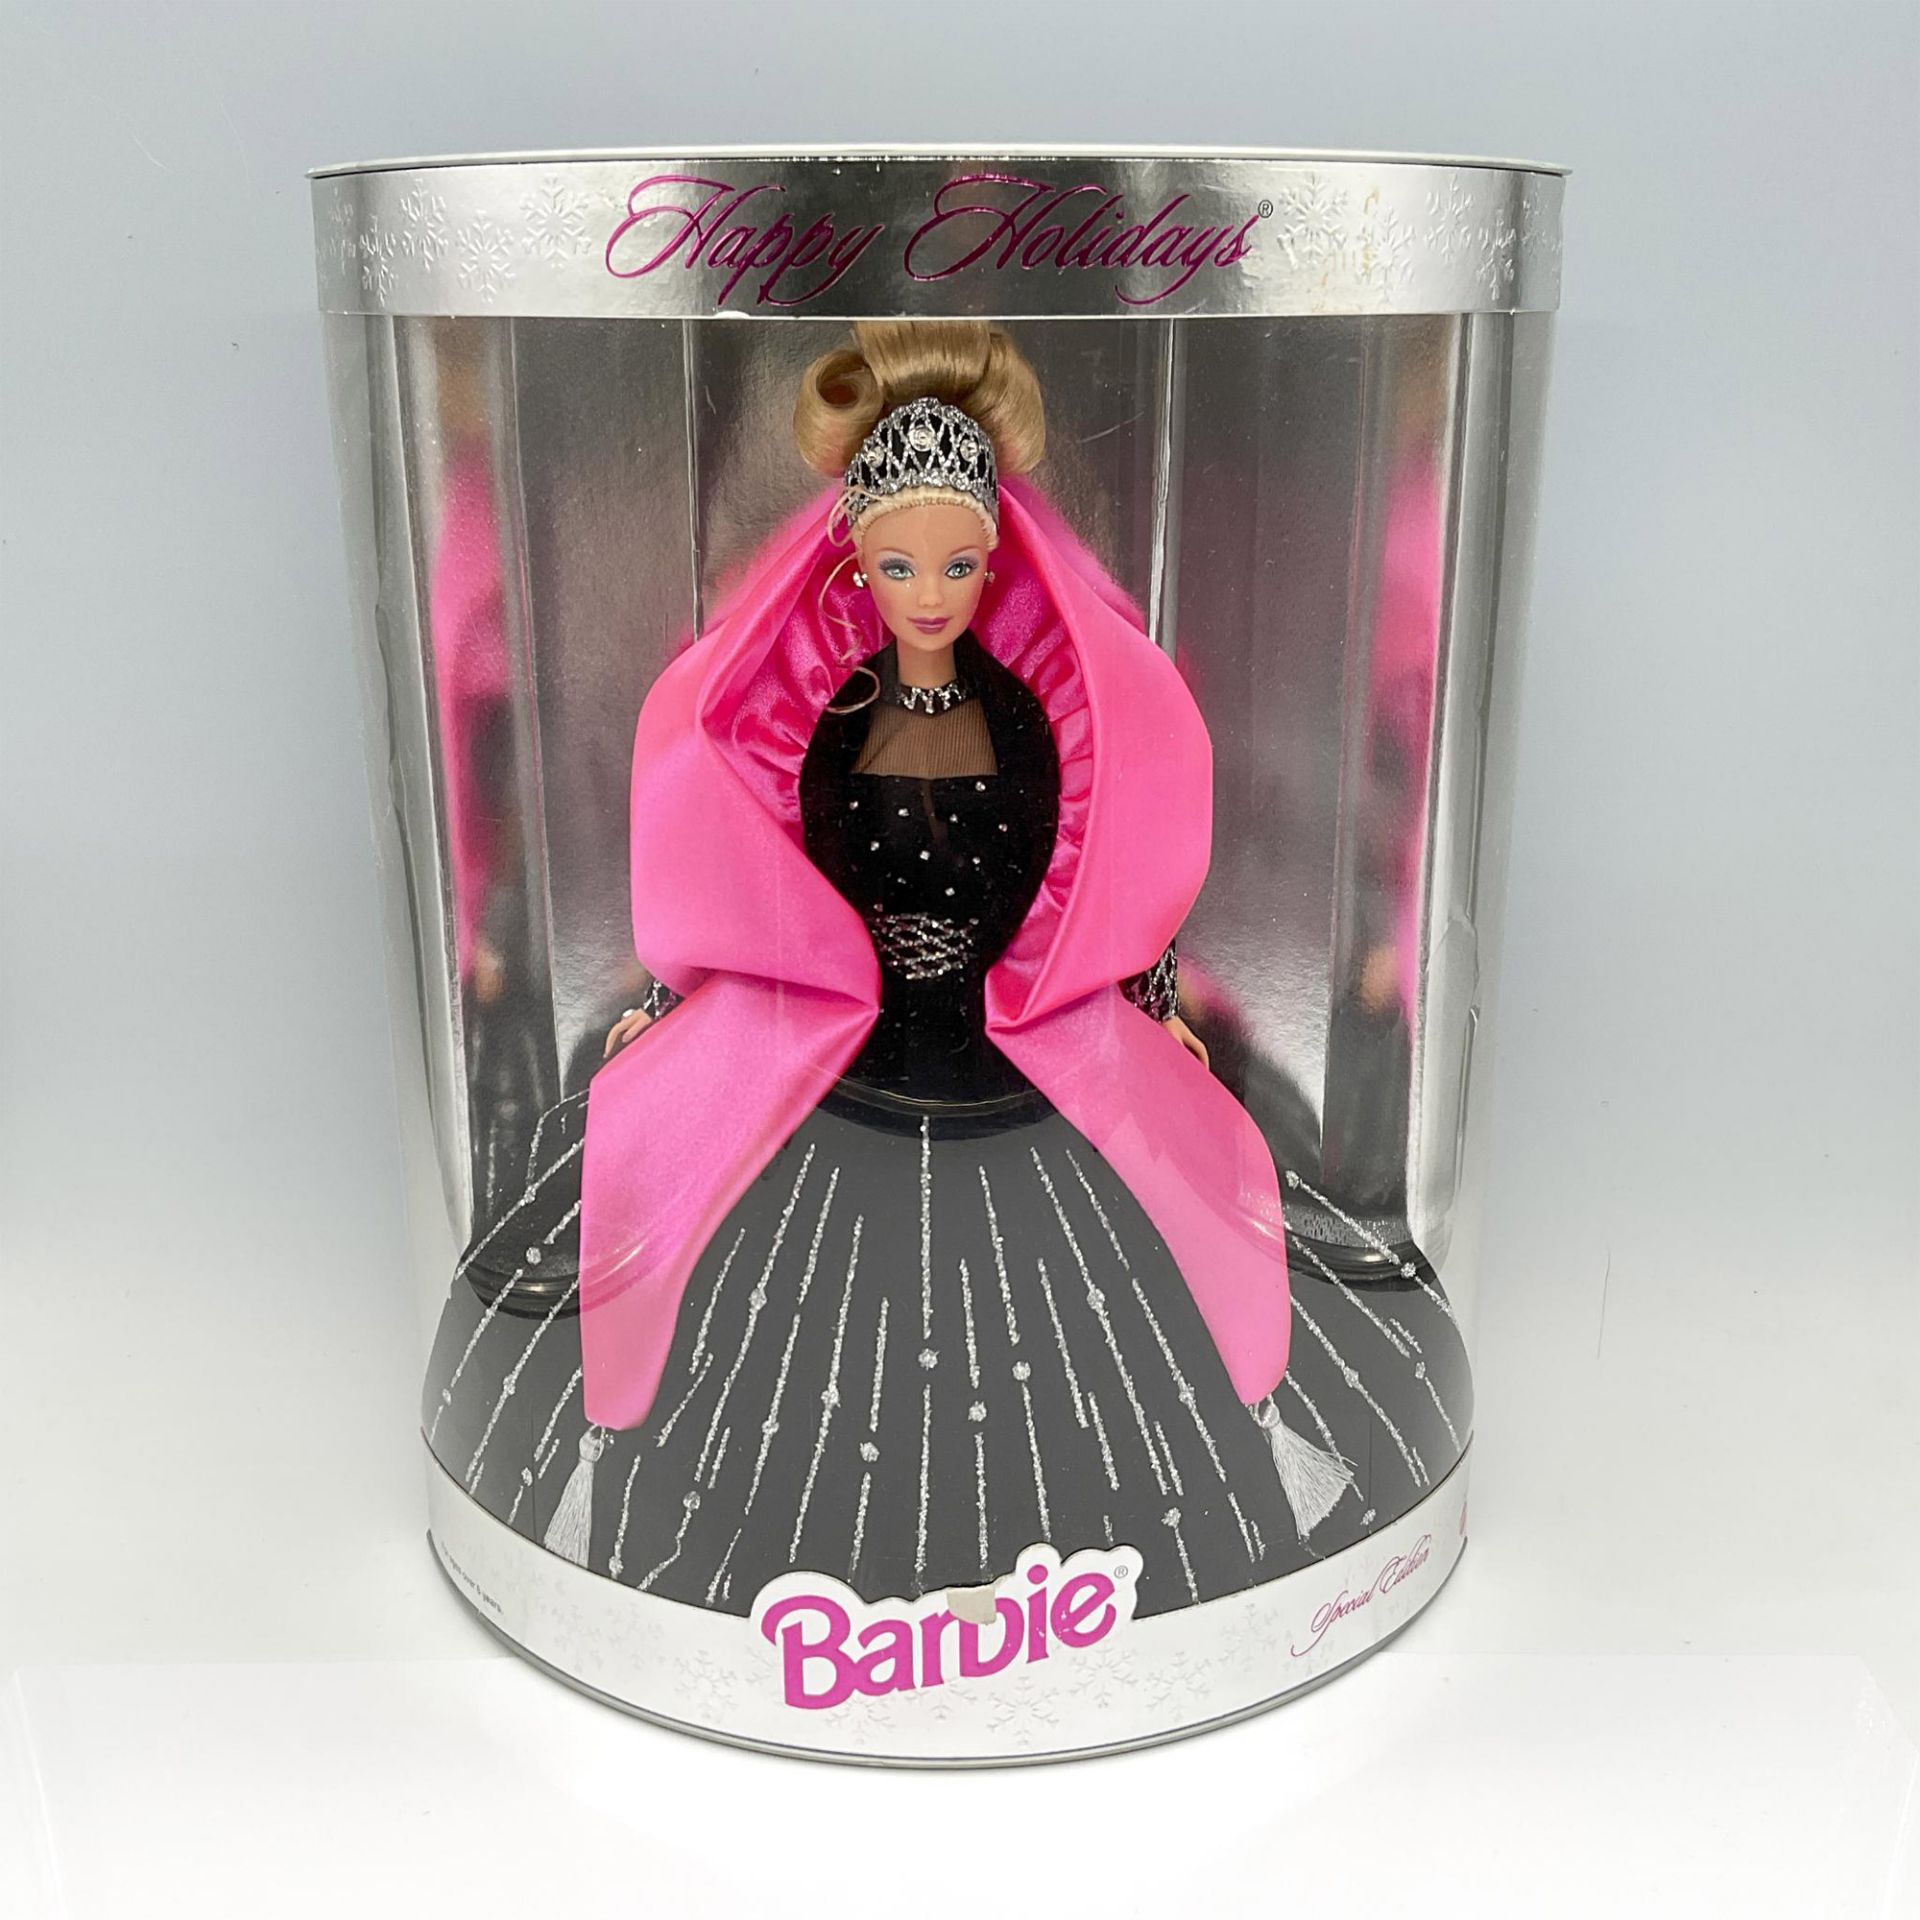 Mattel Barbie Doll, Special Edition, Happy Holidays